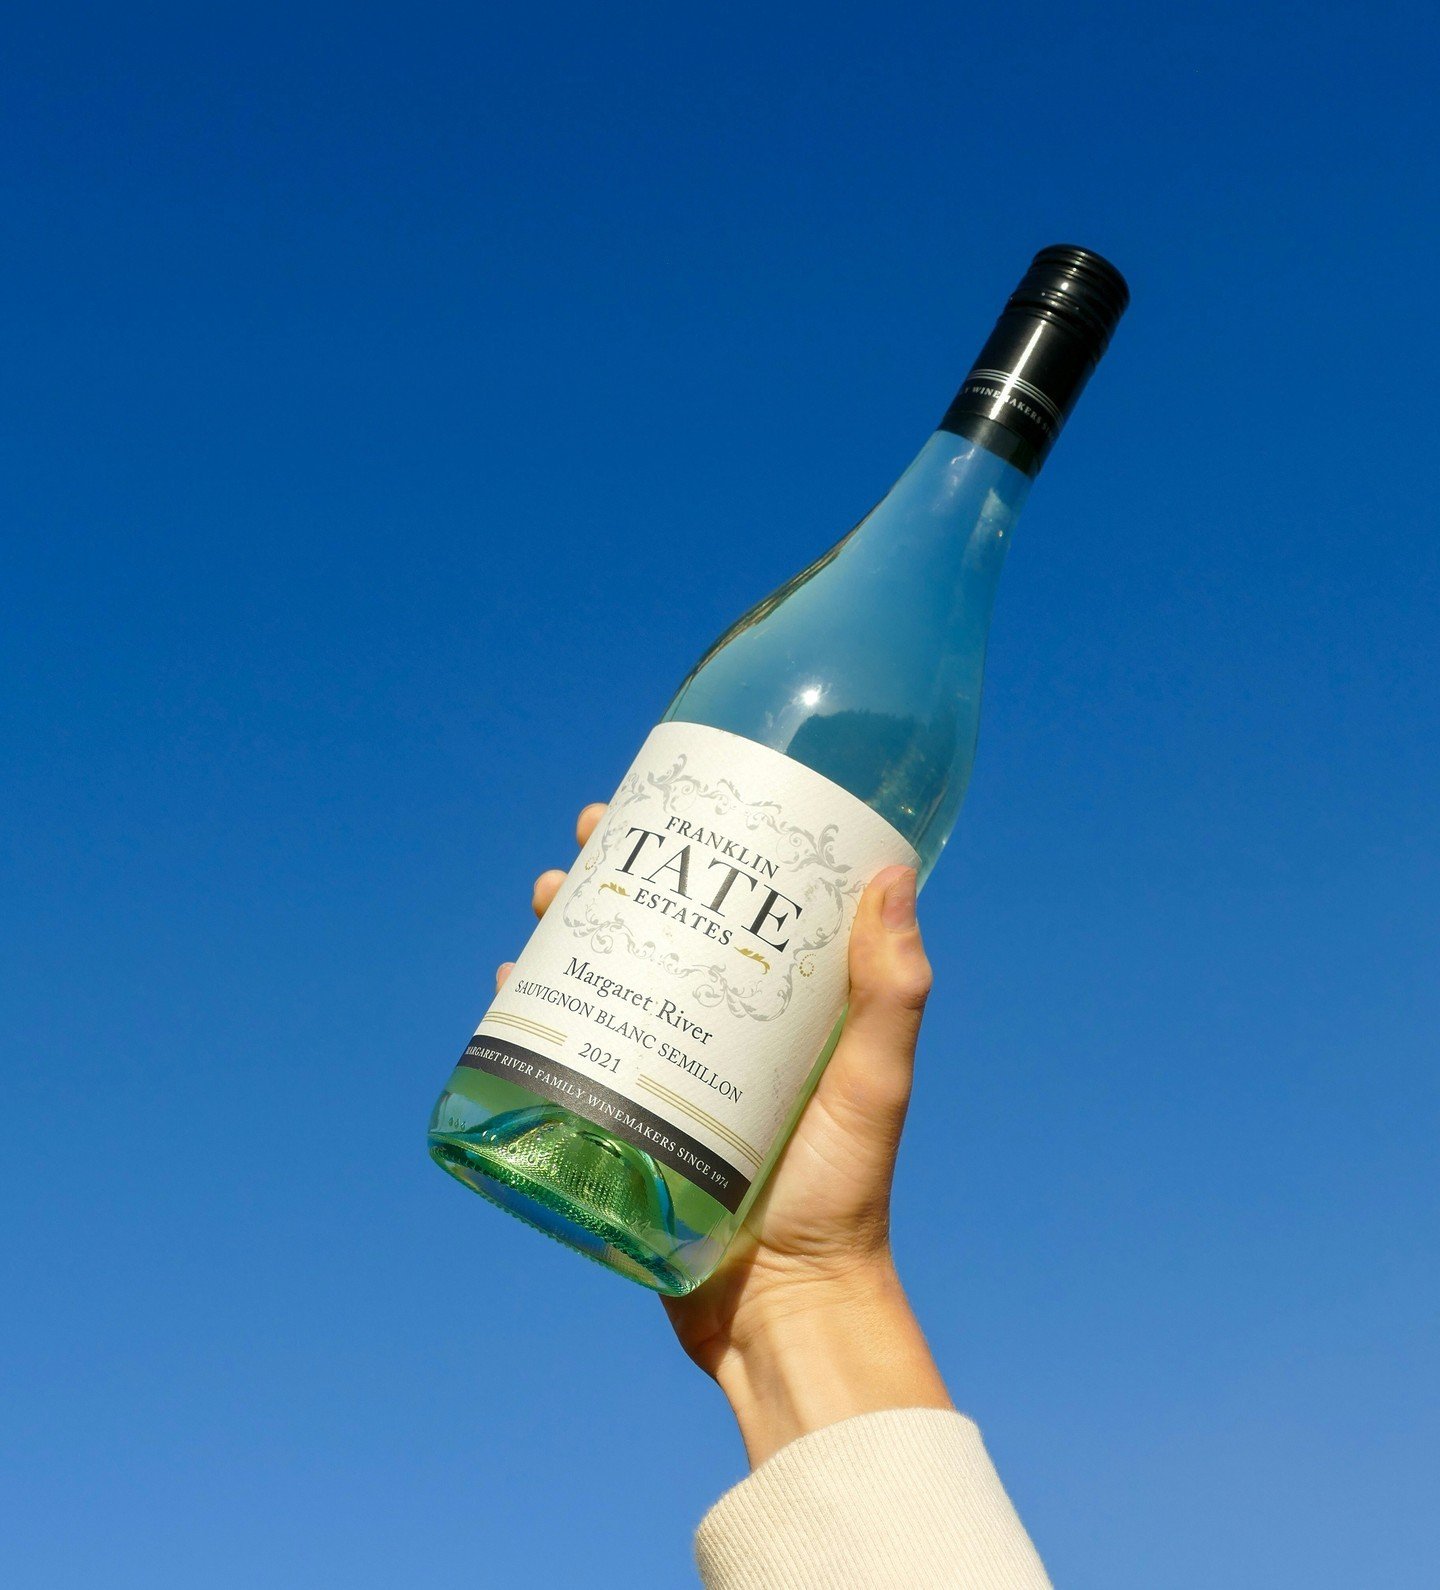 Our Sauvignon Blanc Semillon has a crisp bright acidity, lemongrass and lime palate. Complemented by juicy guavas and honeydew melons.